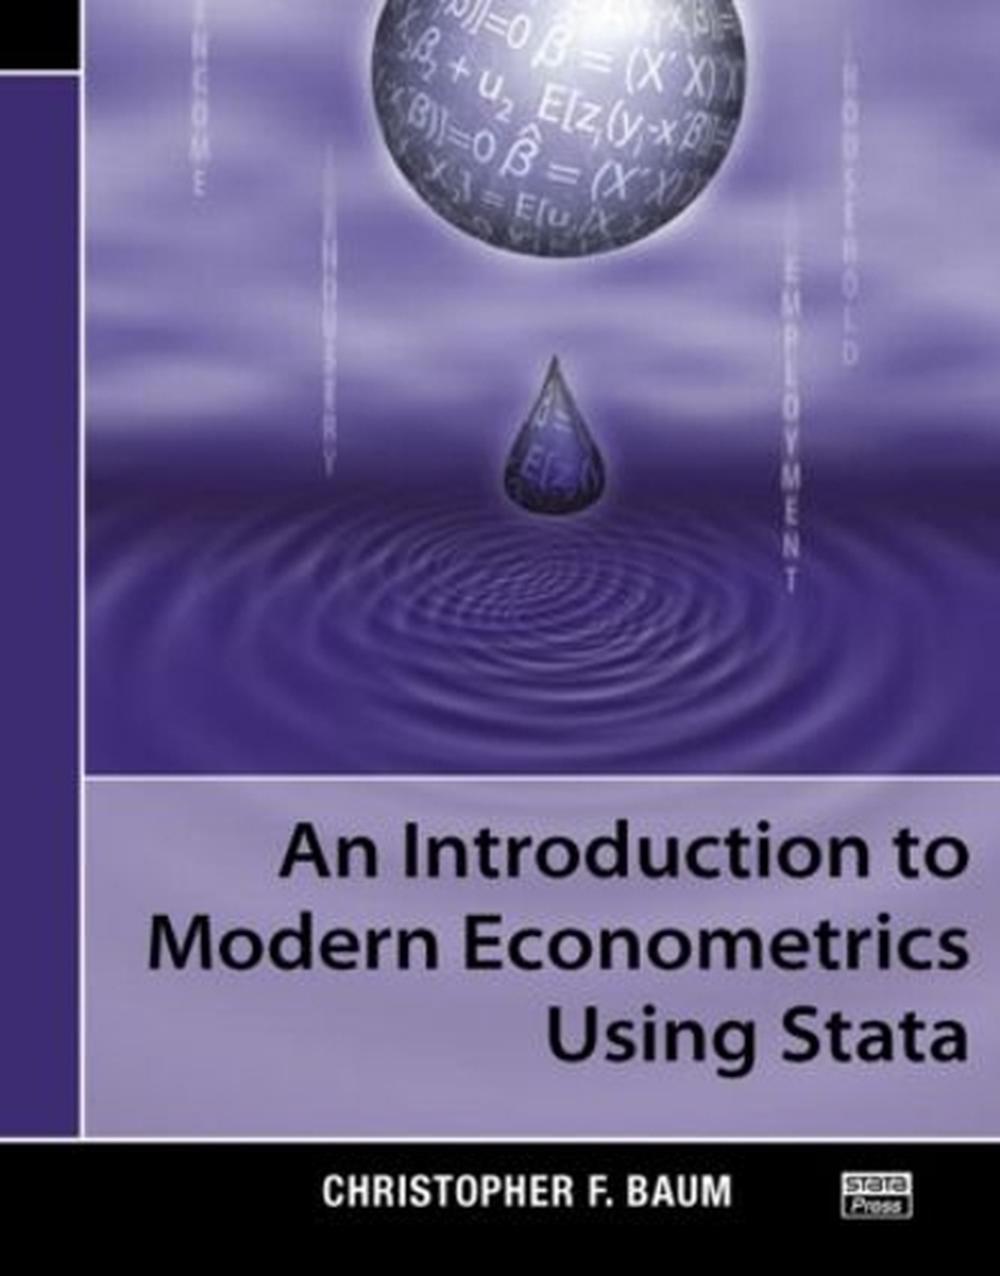 An Introduction to Modern Econometrics Using Stata by Christopher F